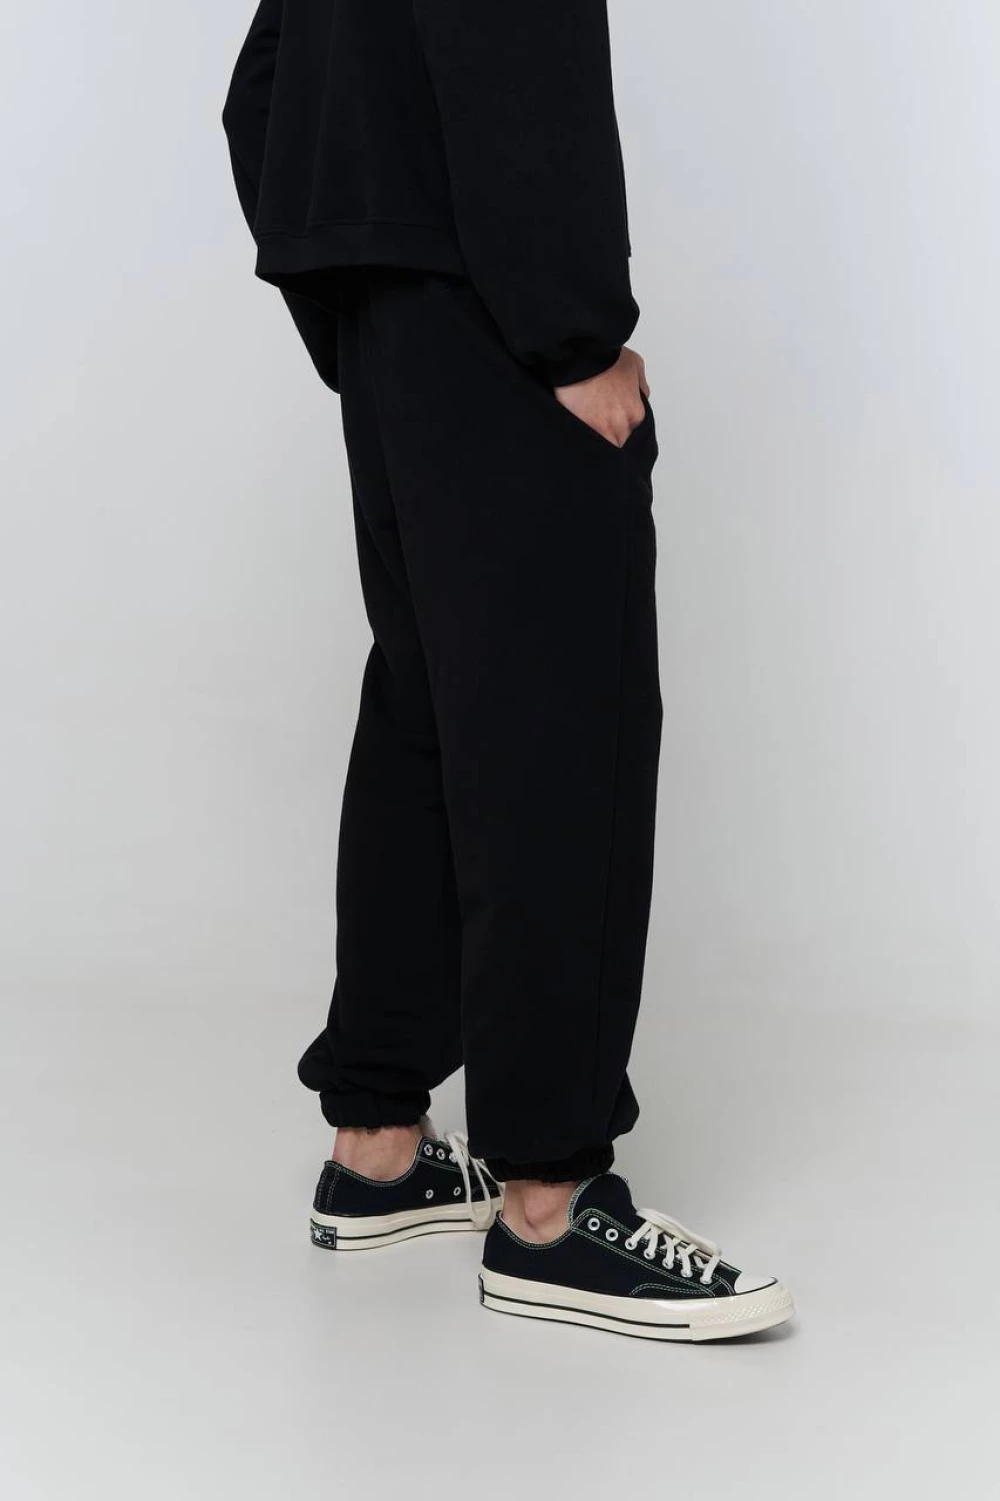 pants "groove" in black color